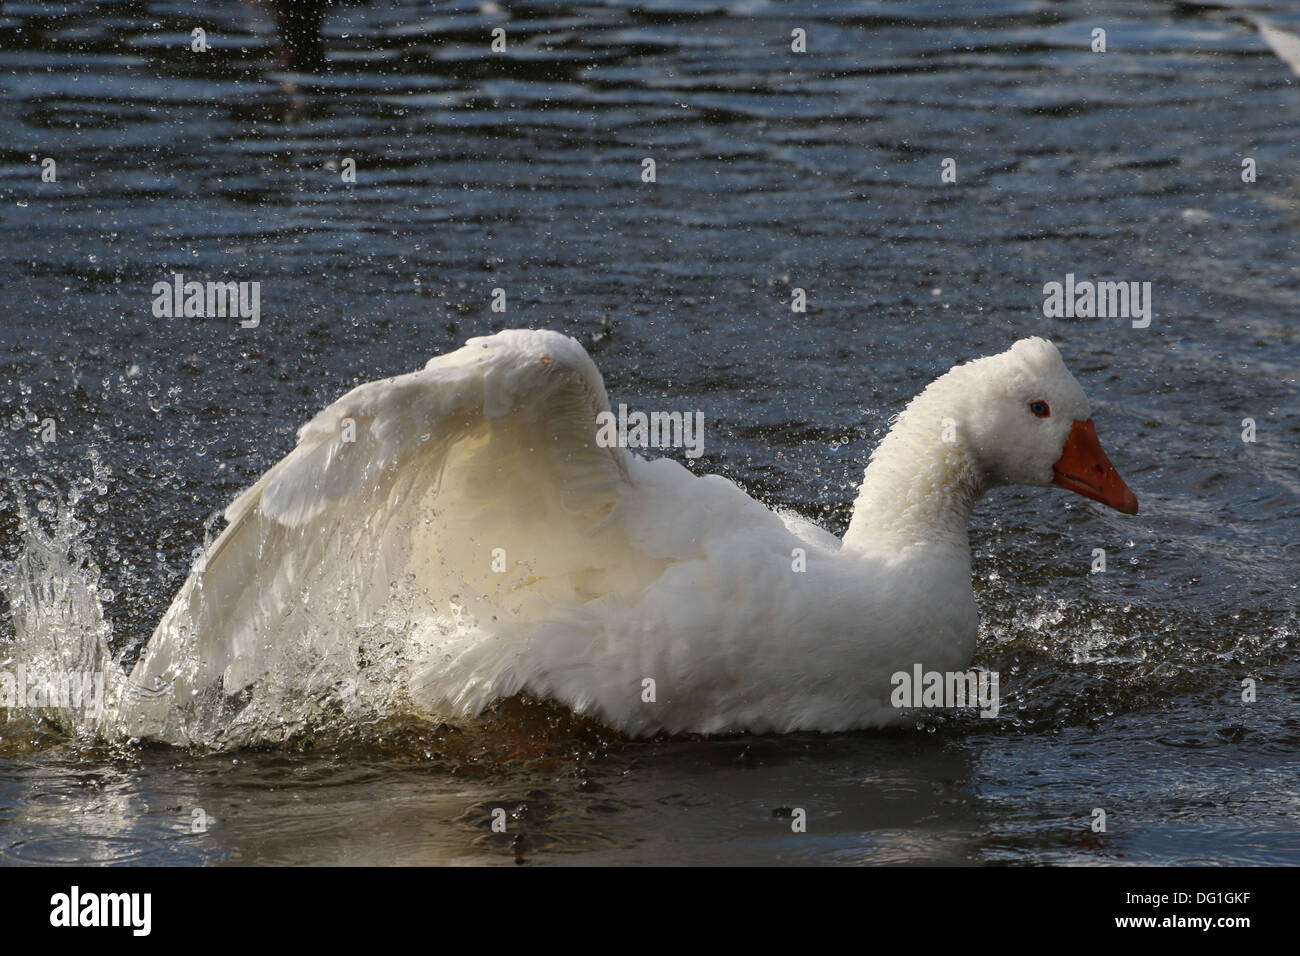 Domestic goose ( Anser anser domesticus) bathing and flapping session (18 images in series) Stock Photo